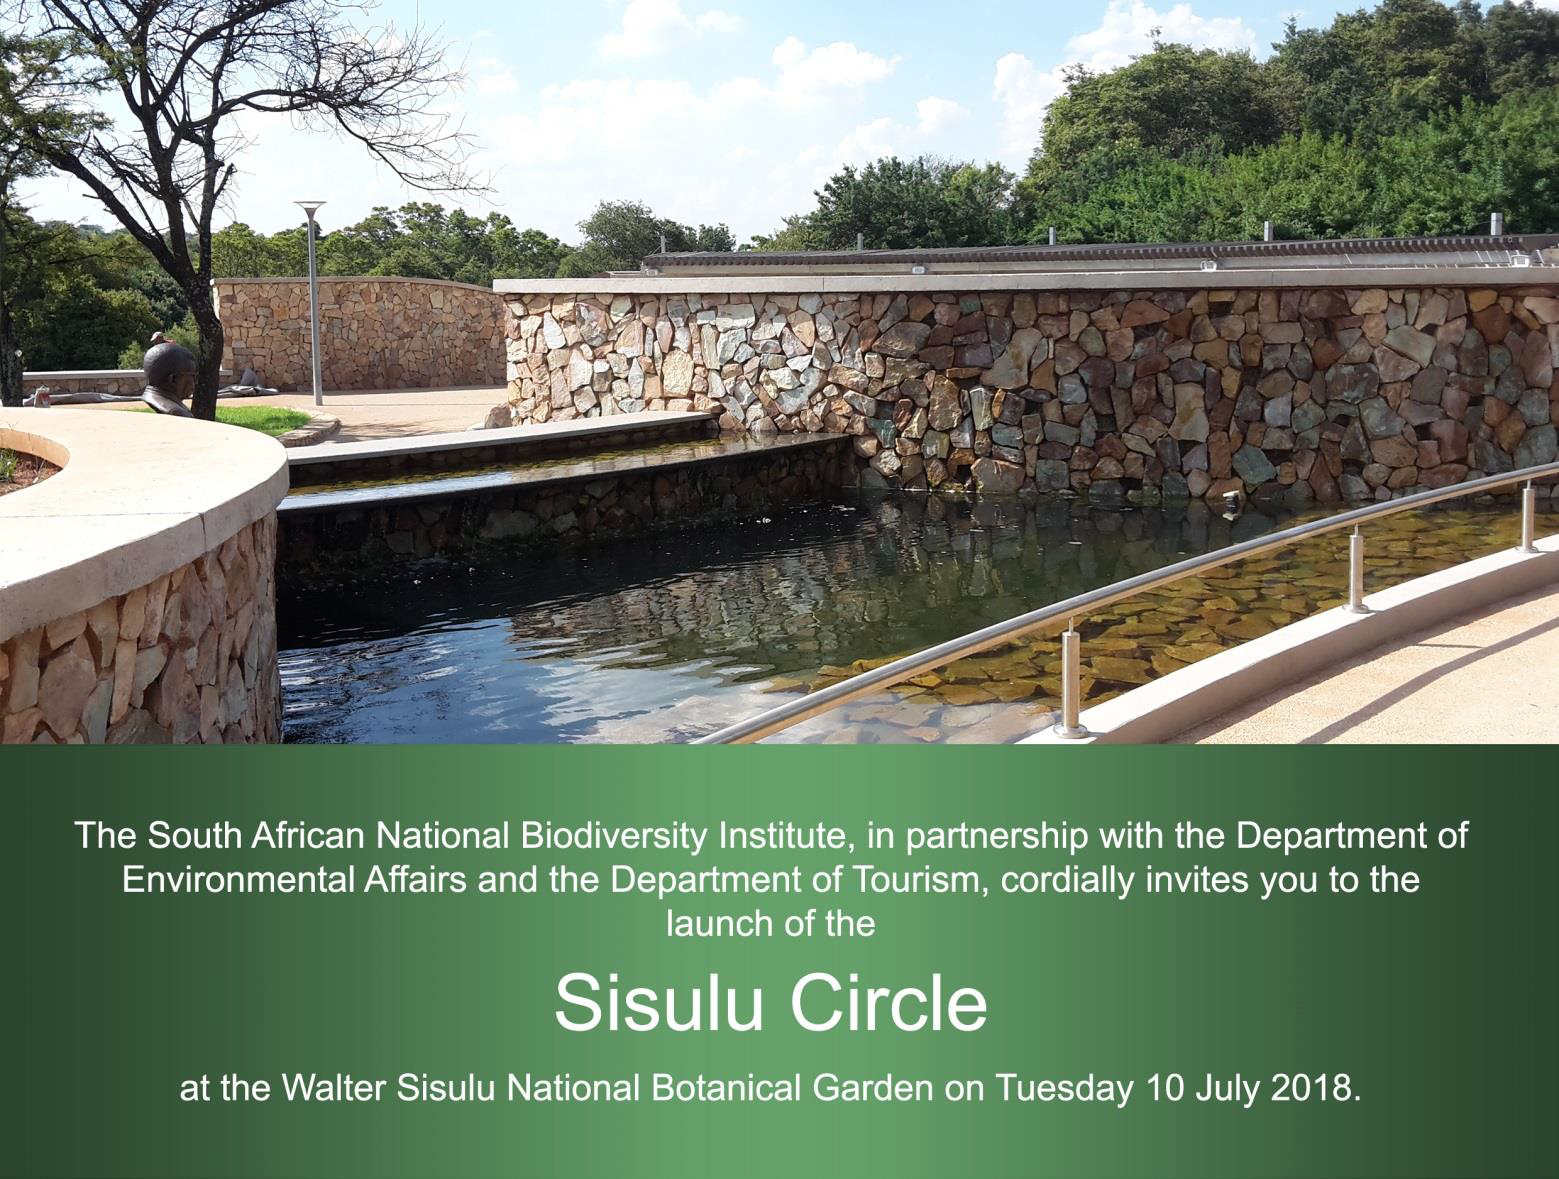 Launch of the Sisulu Circle at the Walter Sisulu National Botanical Garden